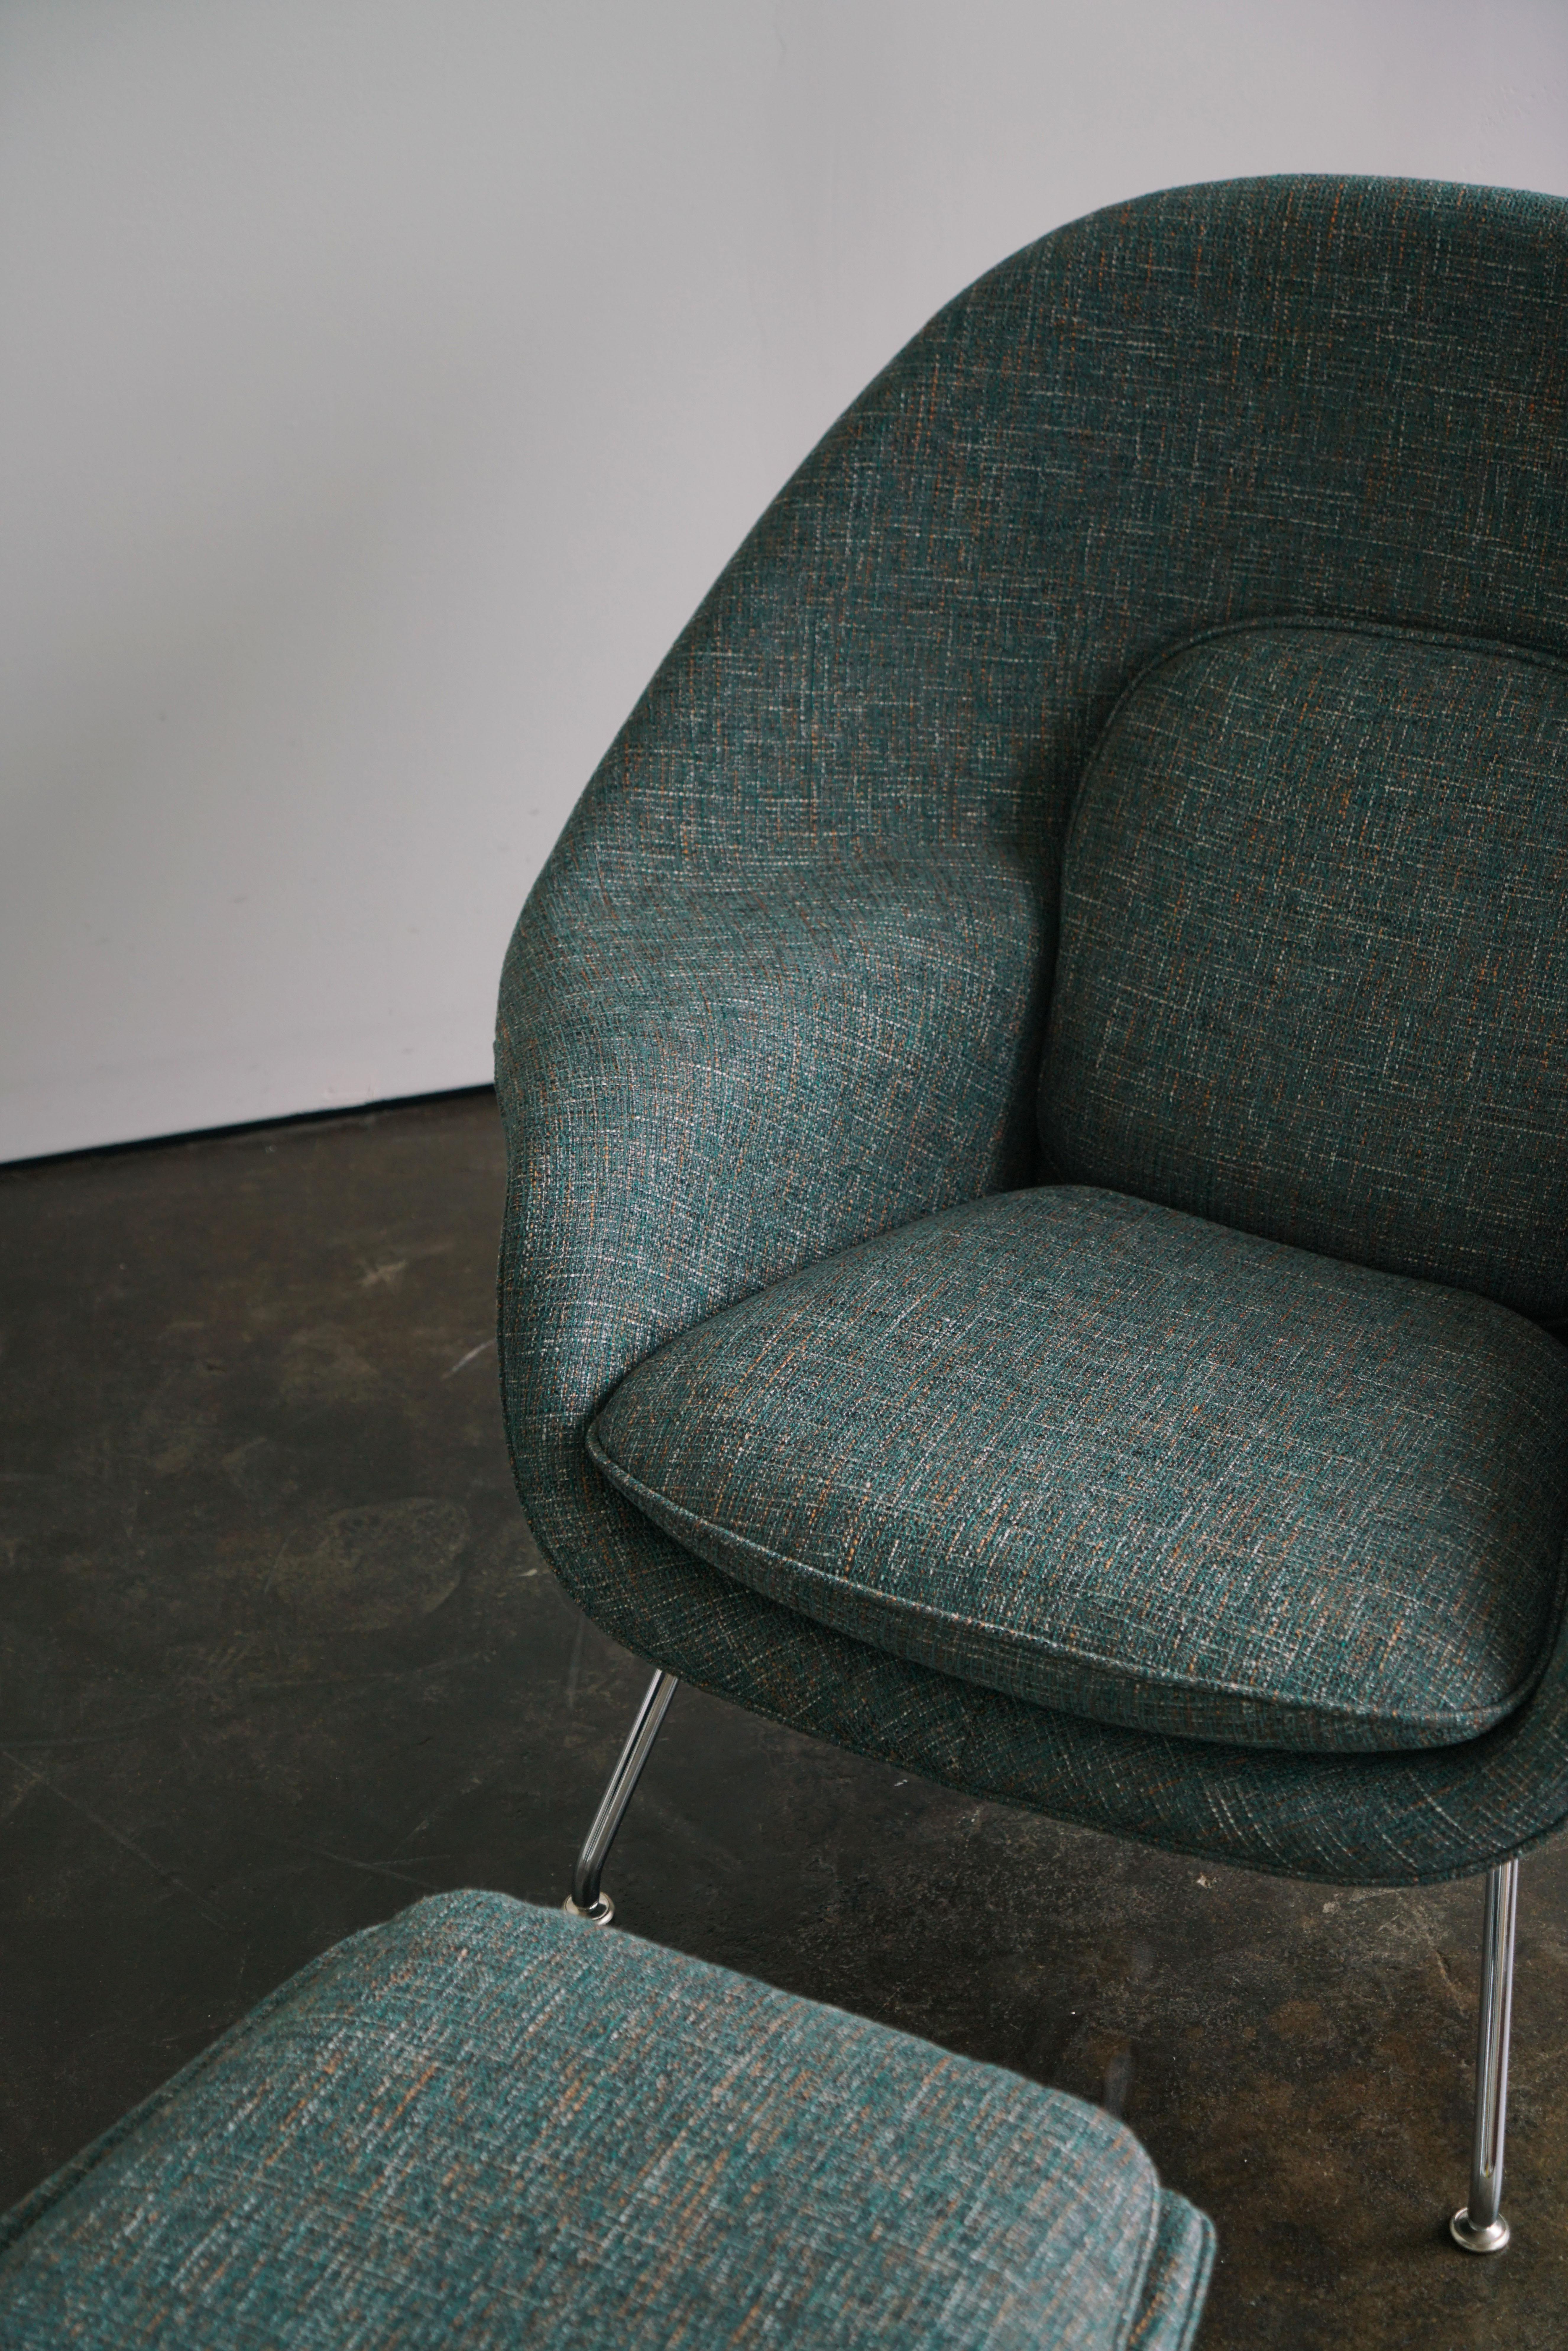 Womb chair and ottoman by Eero Saarinen for Knoll, circa 2000’s

Medium version.

Original Knoll Diva: Evergreeen upholstery

Condition: Excellent, nearly as new. Absolutely no flaws on the chair or ottoman. In perfect, mint condtion.